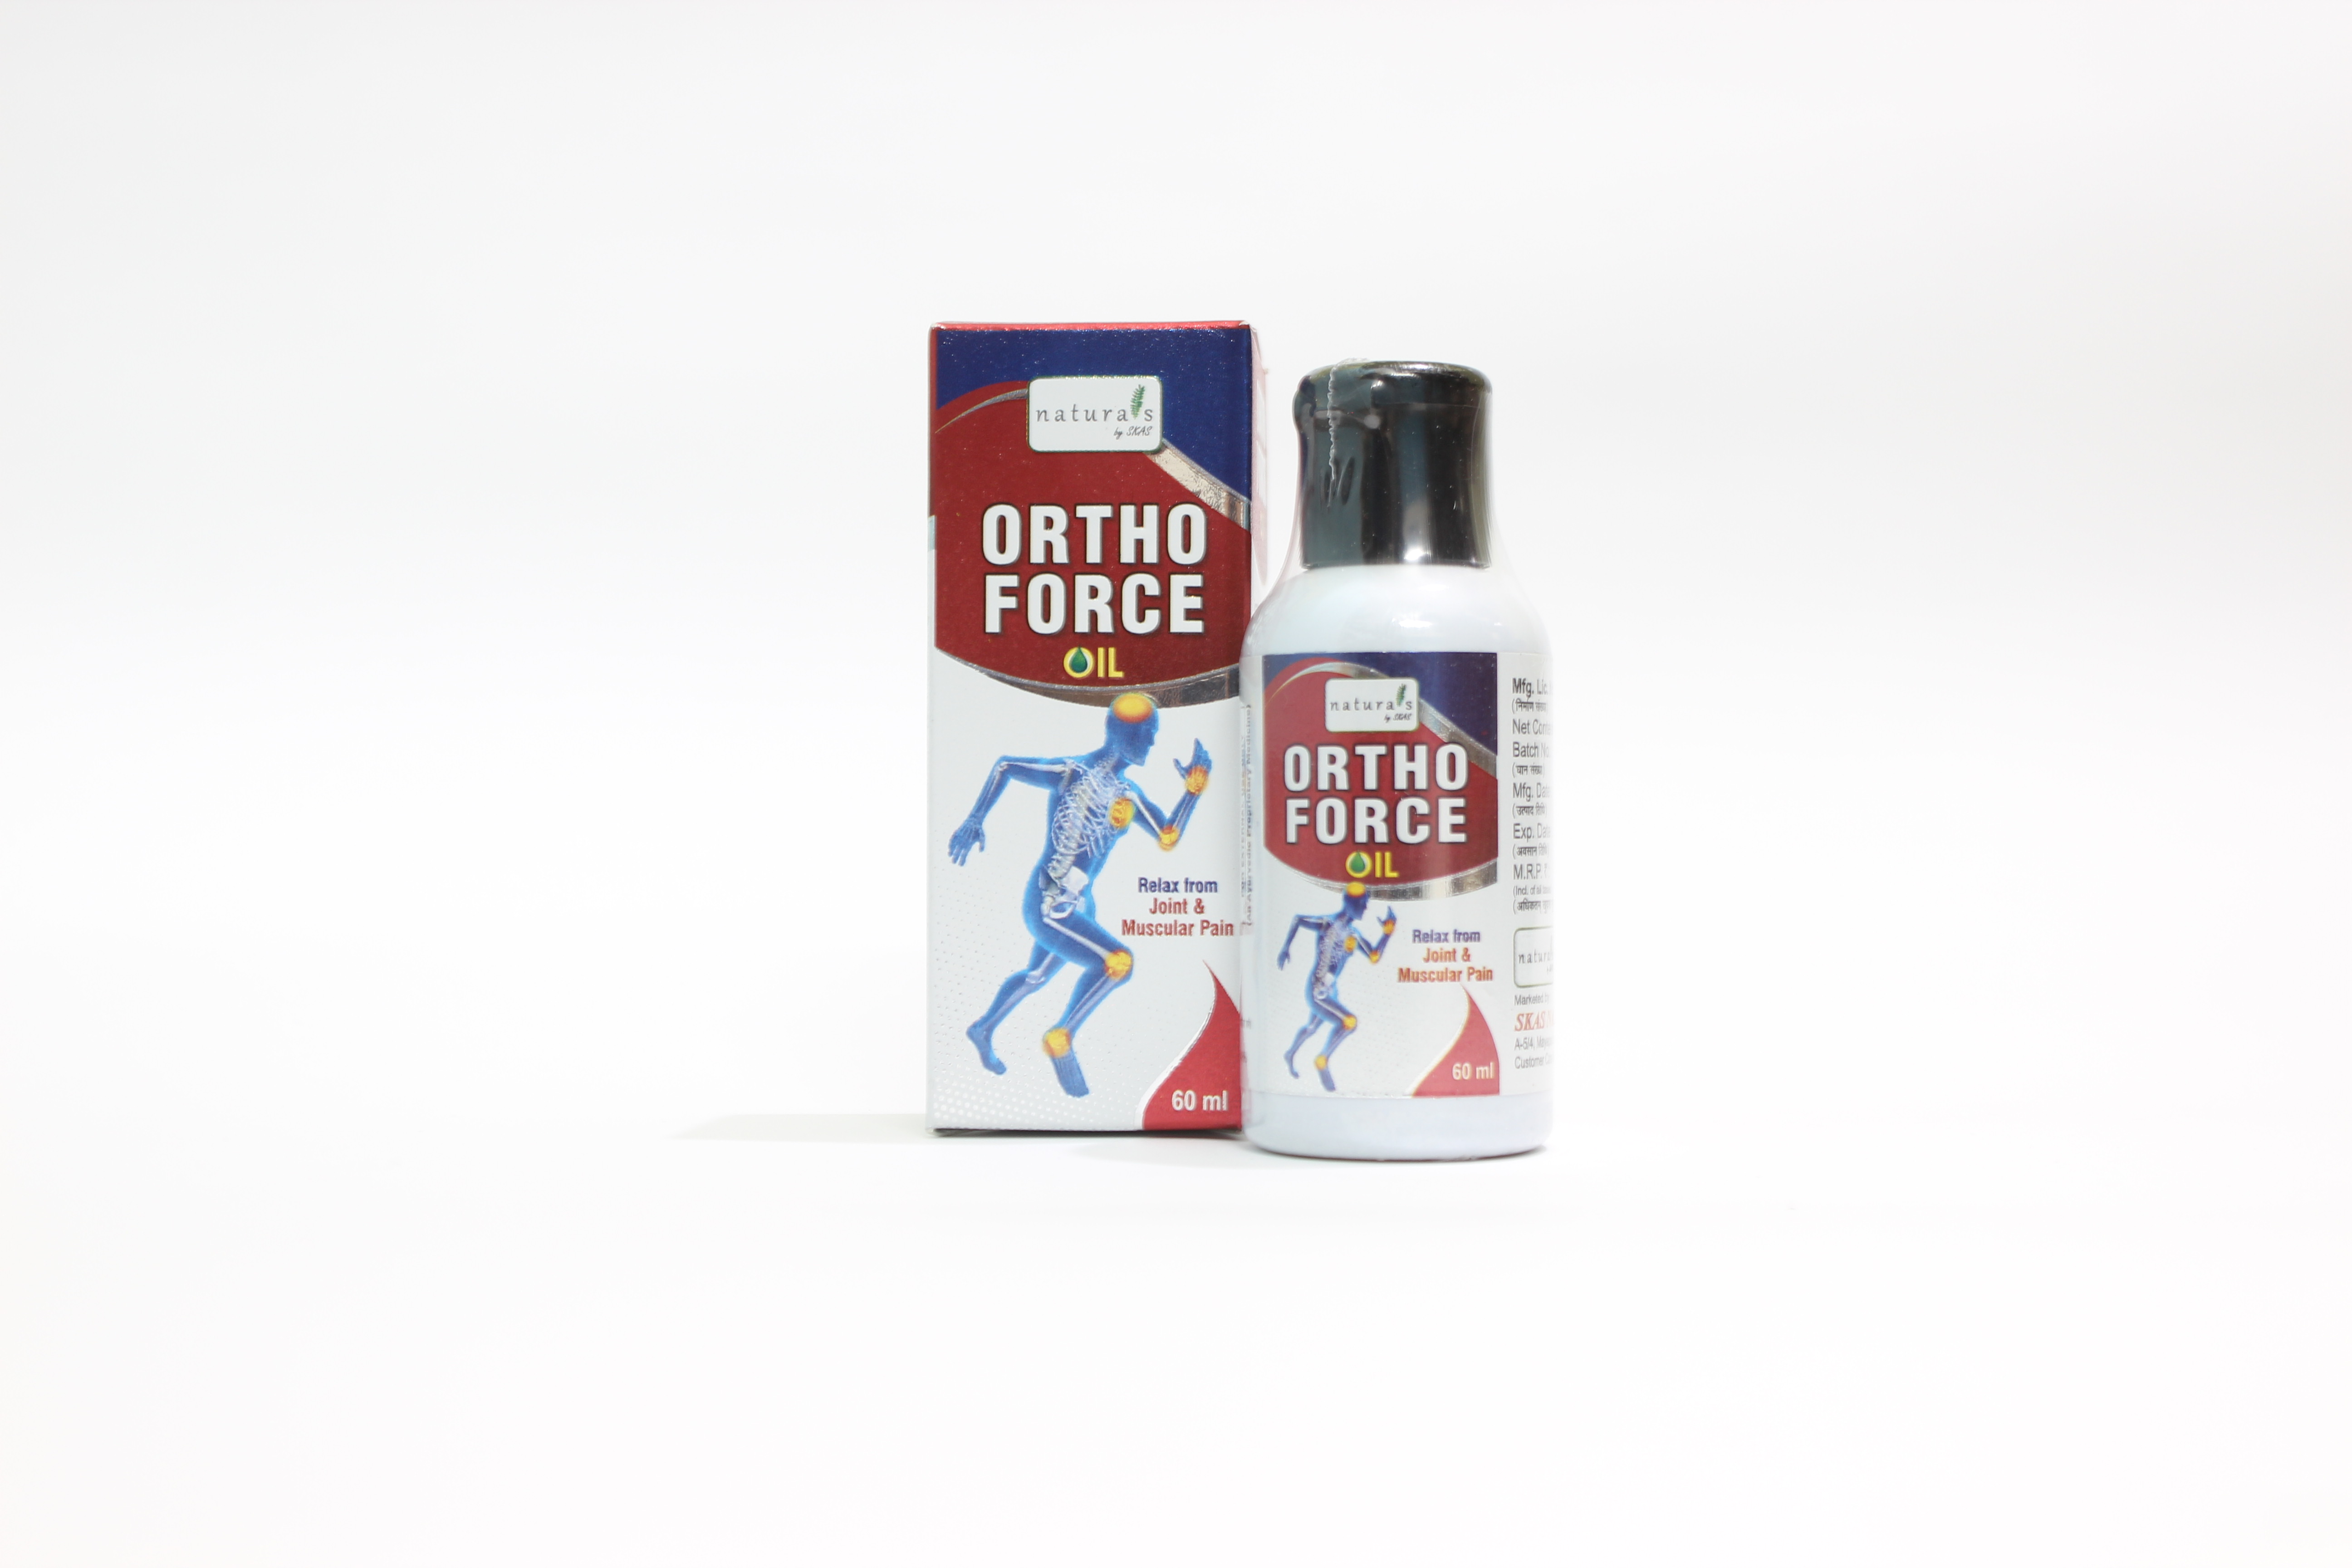 Buy Ortho Force Oil at Best Price Online